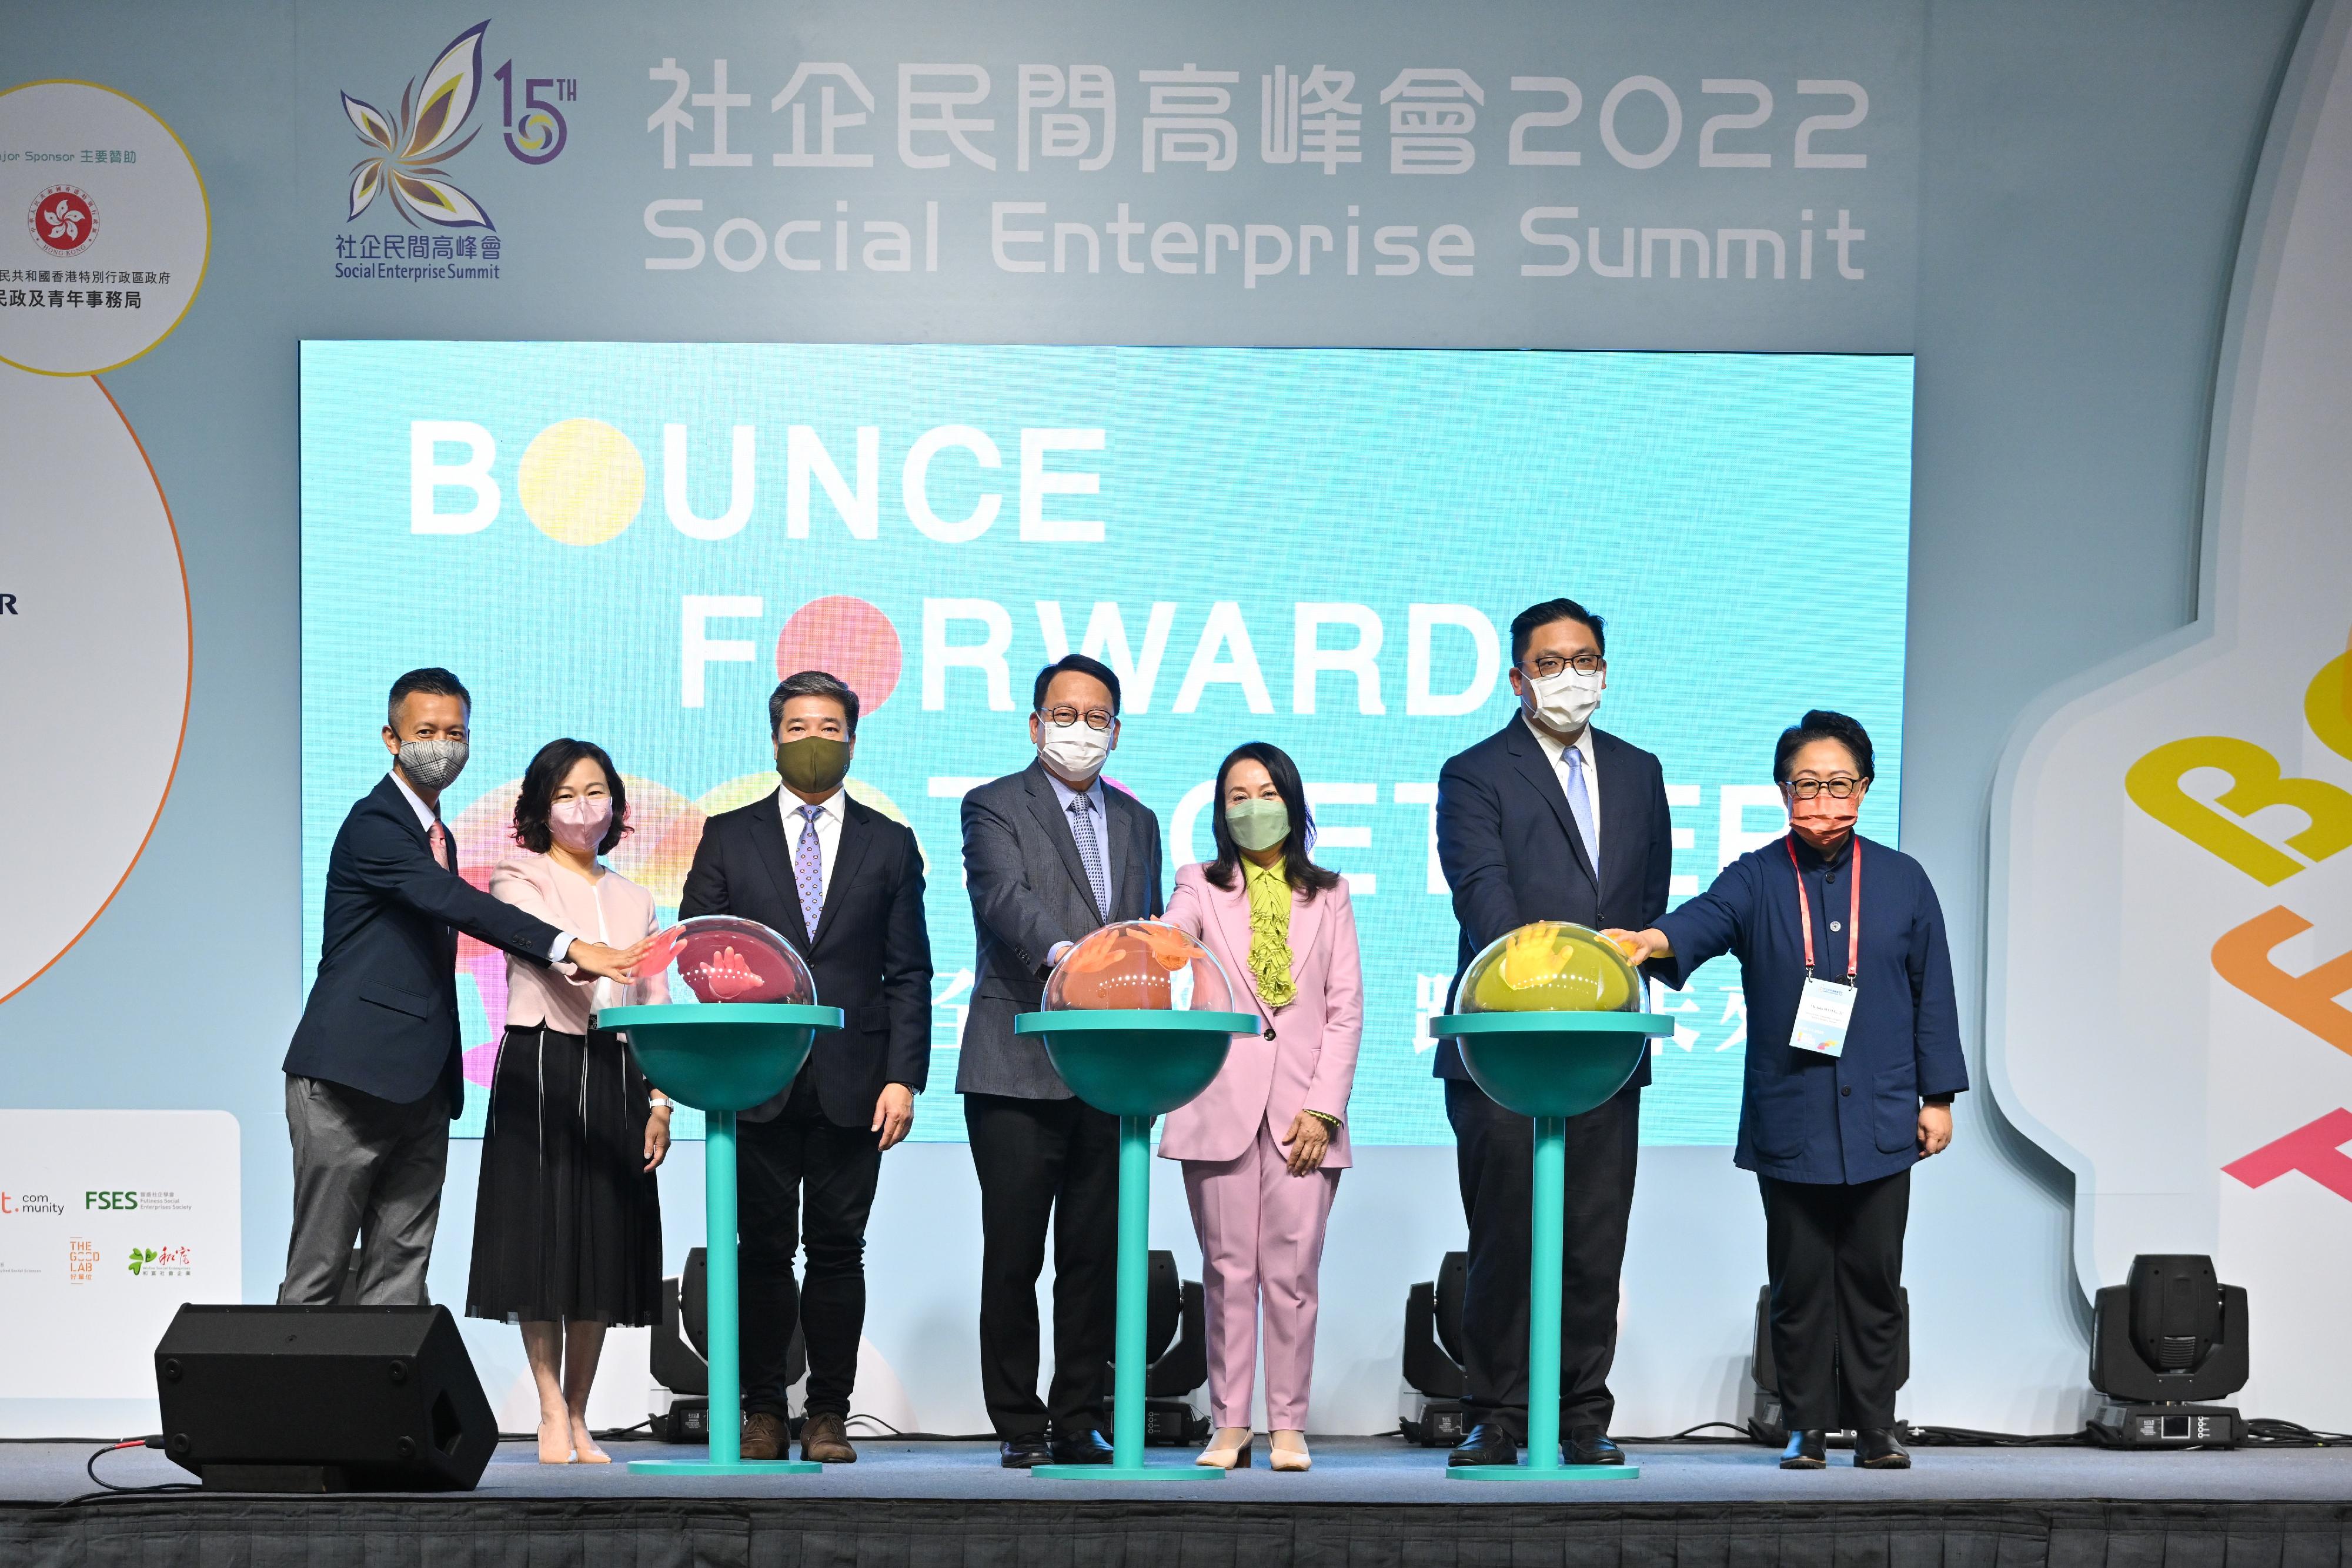 The Chief Secretary for Administration, Mr Chan Kwok-ki, attended the opening ceremony of the Social Enterprise Summit 2022 today (November 24). Photo shows Mr Chan (centre); the Chair of the Organising Committee of the Social Enterprise Summit, Mrs Rebecca Choy Yung (third right); the Chairperson of the Hong Kong Social Entrepreneurship Forum, Mr Alan Cheung (third left); the Under Secretary for Home and Youth Affairs, Mr Clarence Leung (second right); the Director of Home Affairs, Mrs Alice Cheung (second left); and other guests officiating at the opening ceremony.